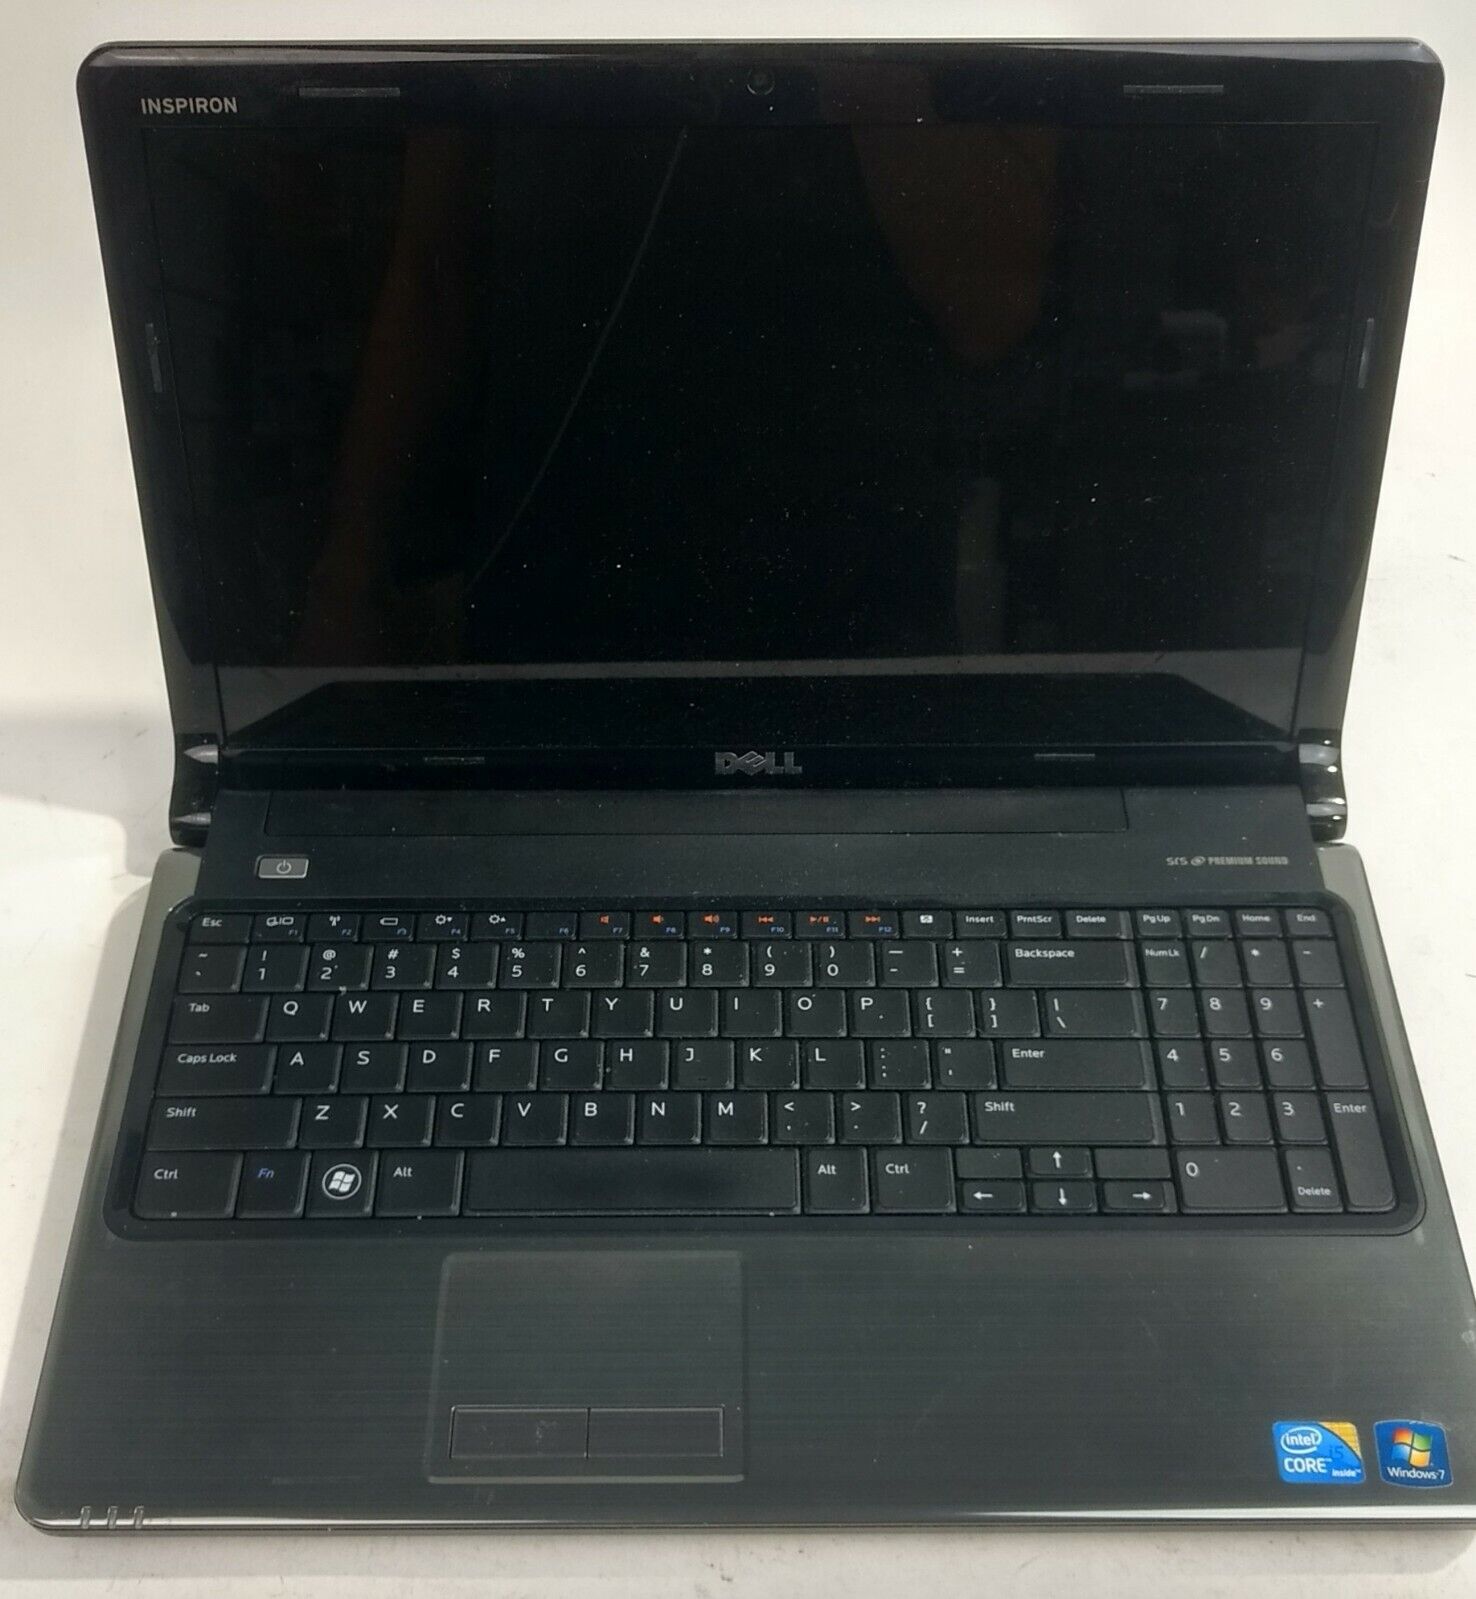 Dell Inspiron 1564 i5-430M @ 2.27GHz 4GB RAM 750GB HDD Win 10 Home w/  Adapter